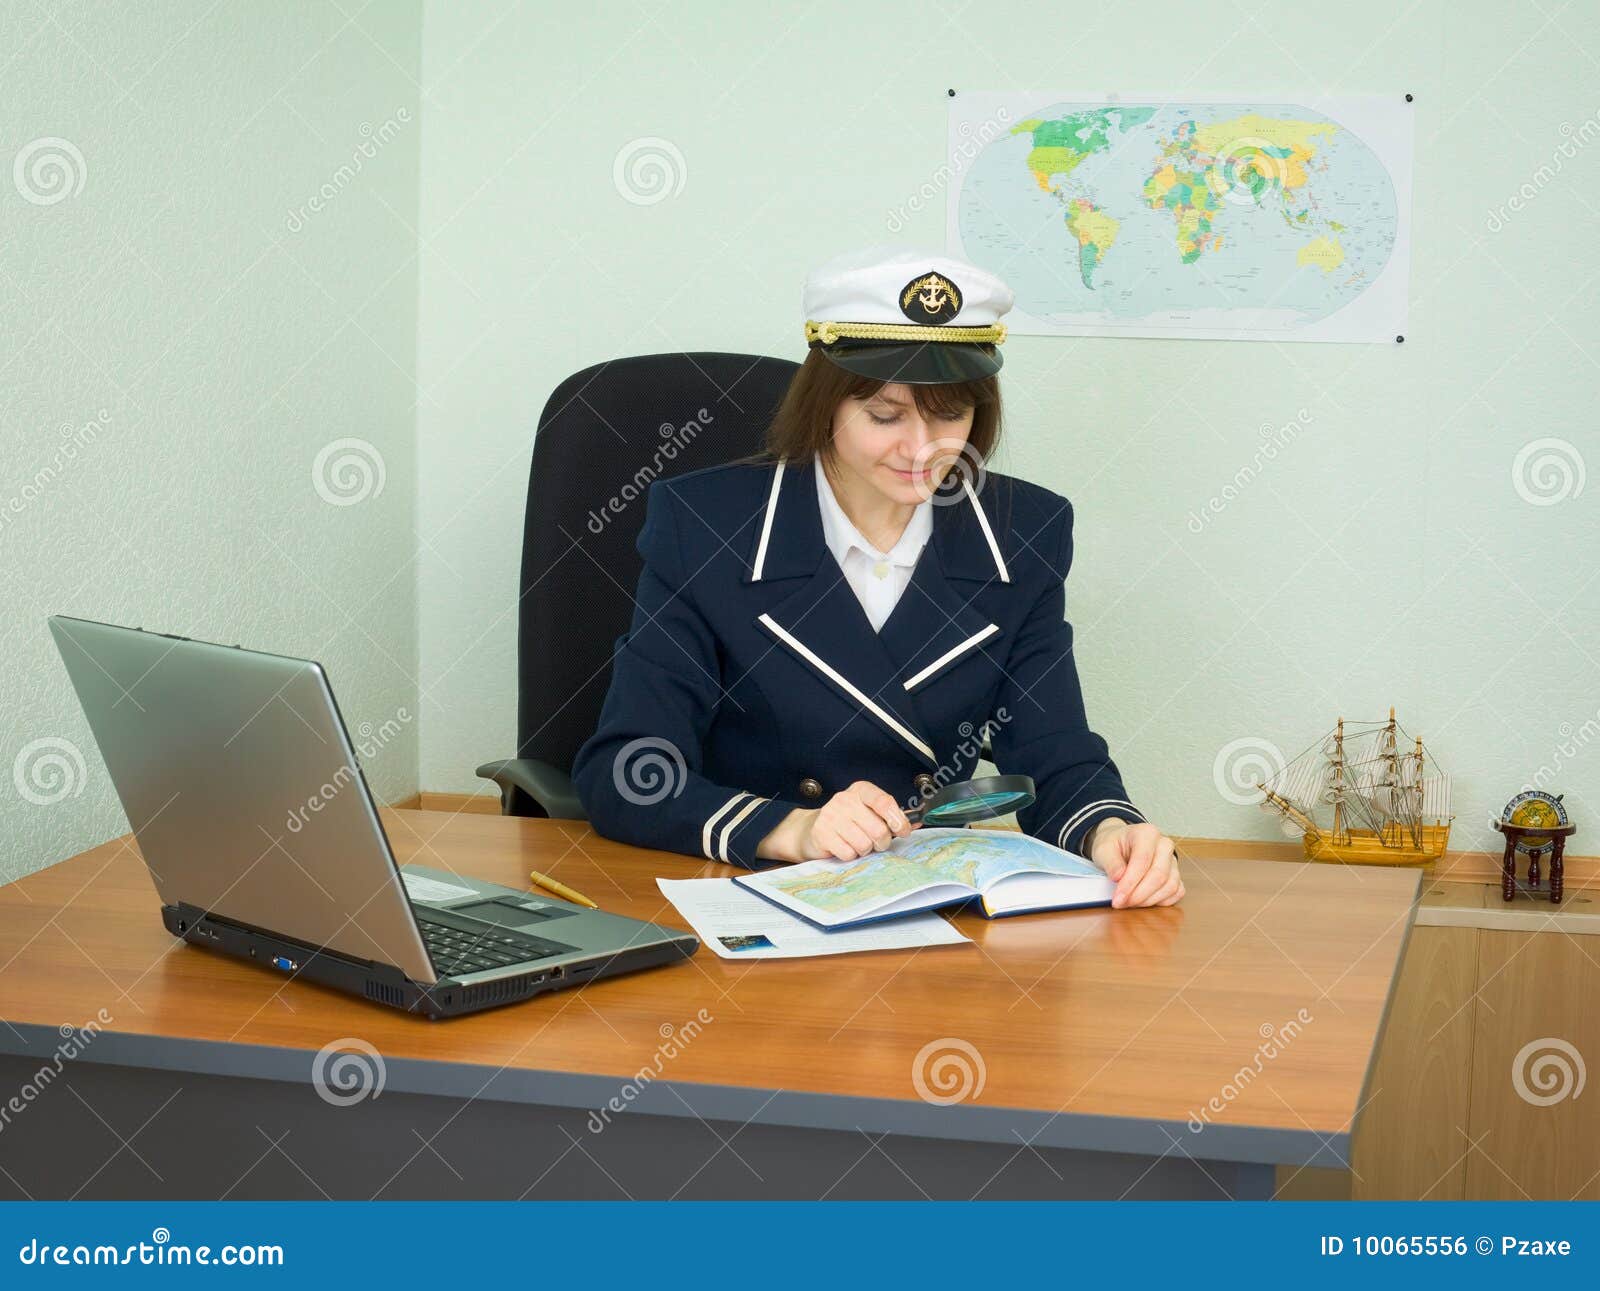 in uniform of captain examines geographical